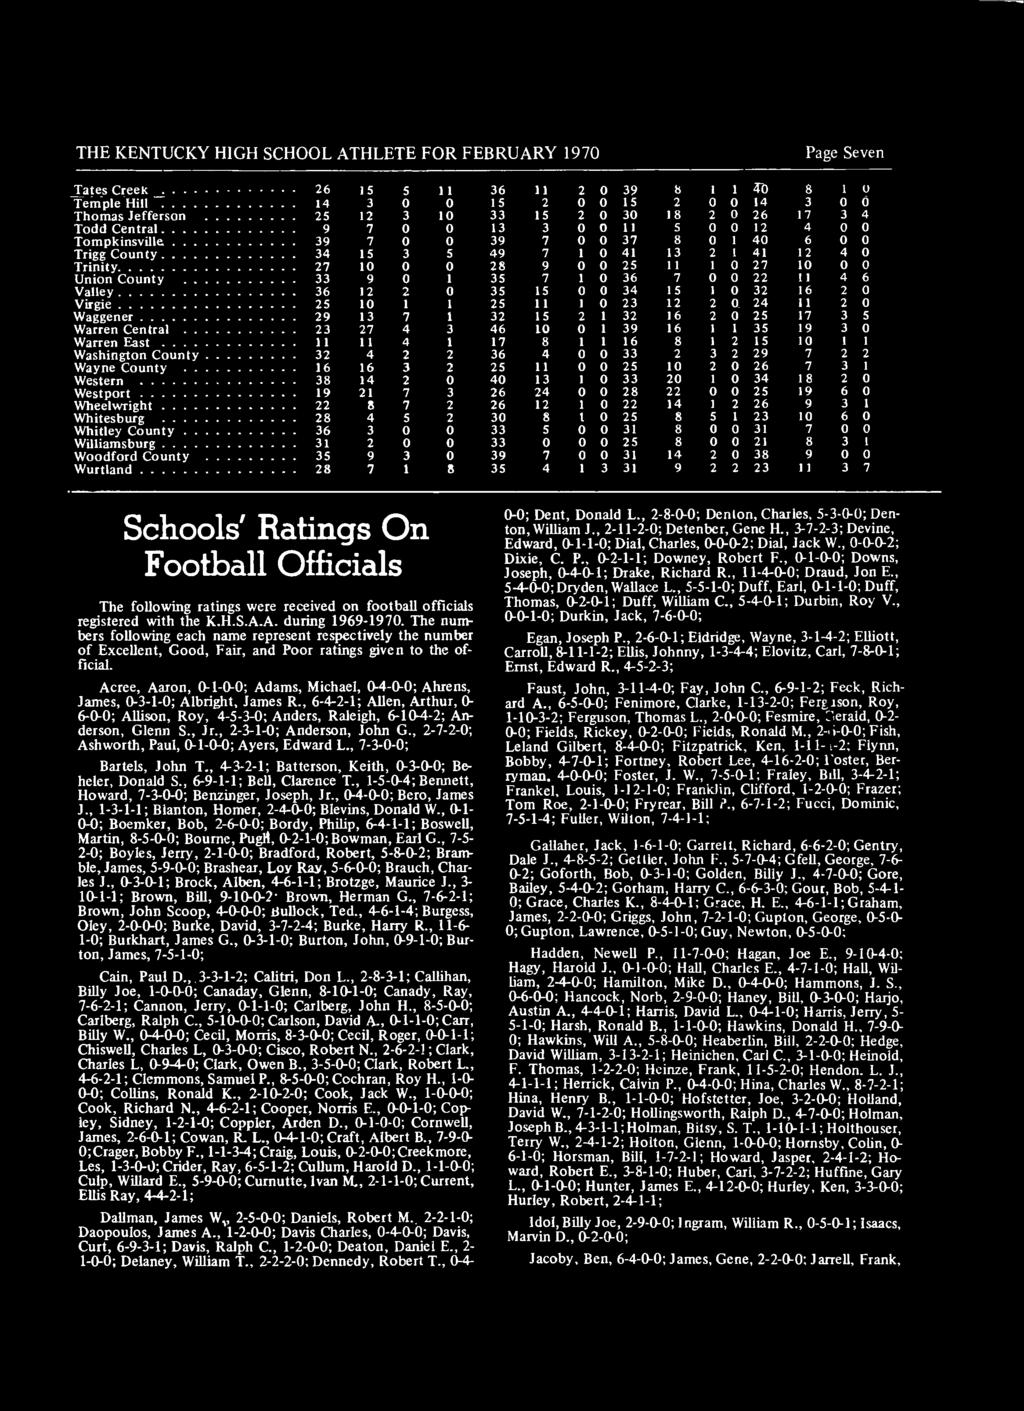 Whitley County 36 Williamsburg 31 Woodford County 35 Wurtland 28 Schools' Ratings On Football Officials The following ratings were received on football officials registered with the K.H.S.A.